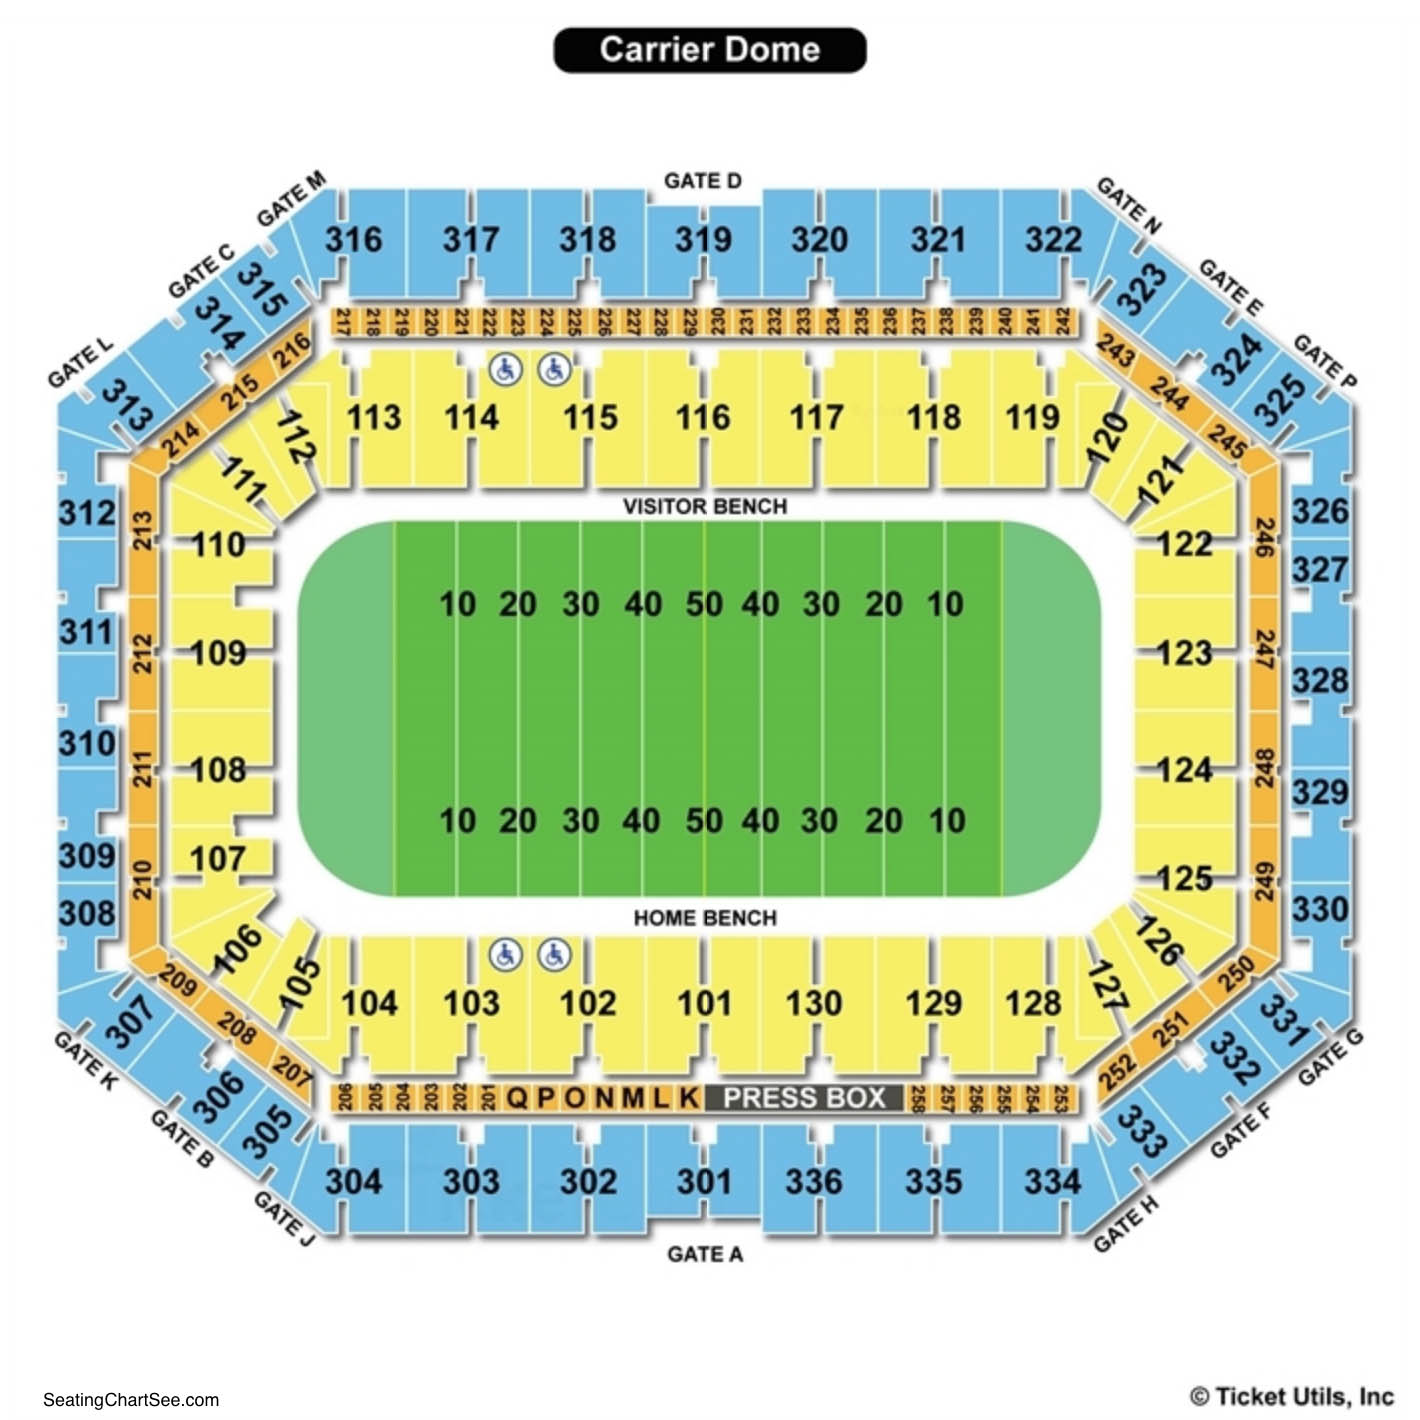 Carrier Dome Seating Charts Views Games Answers Cheats